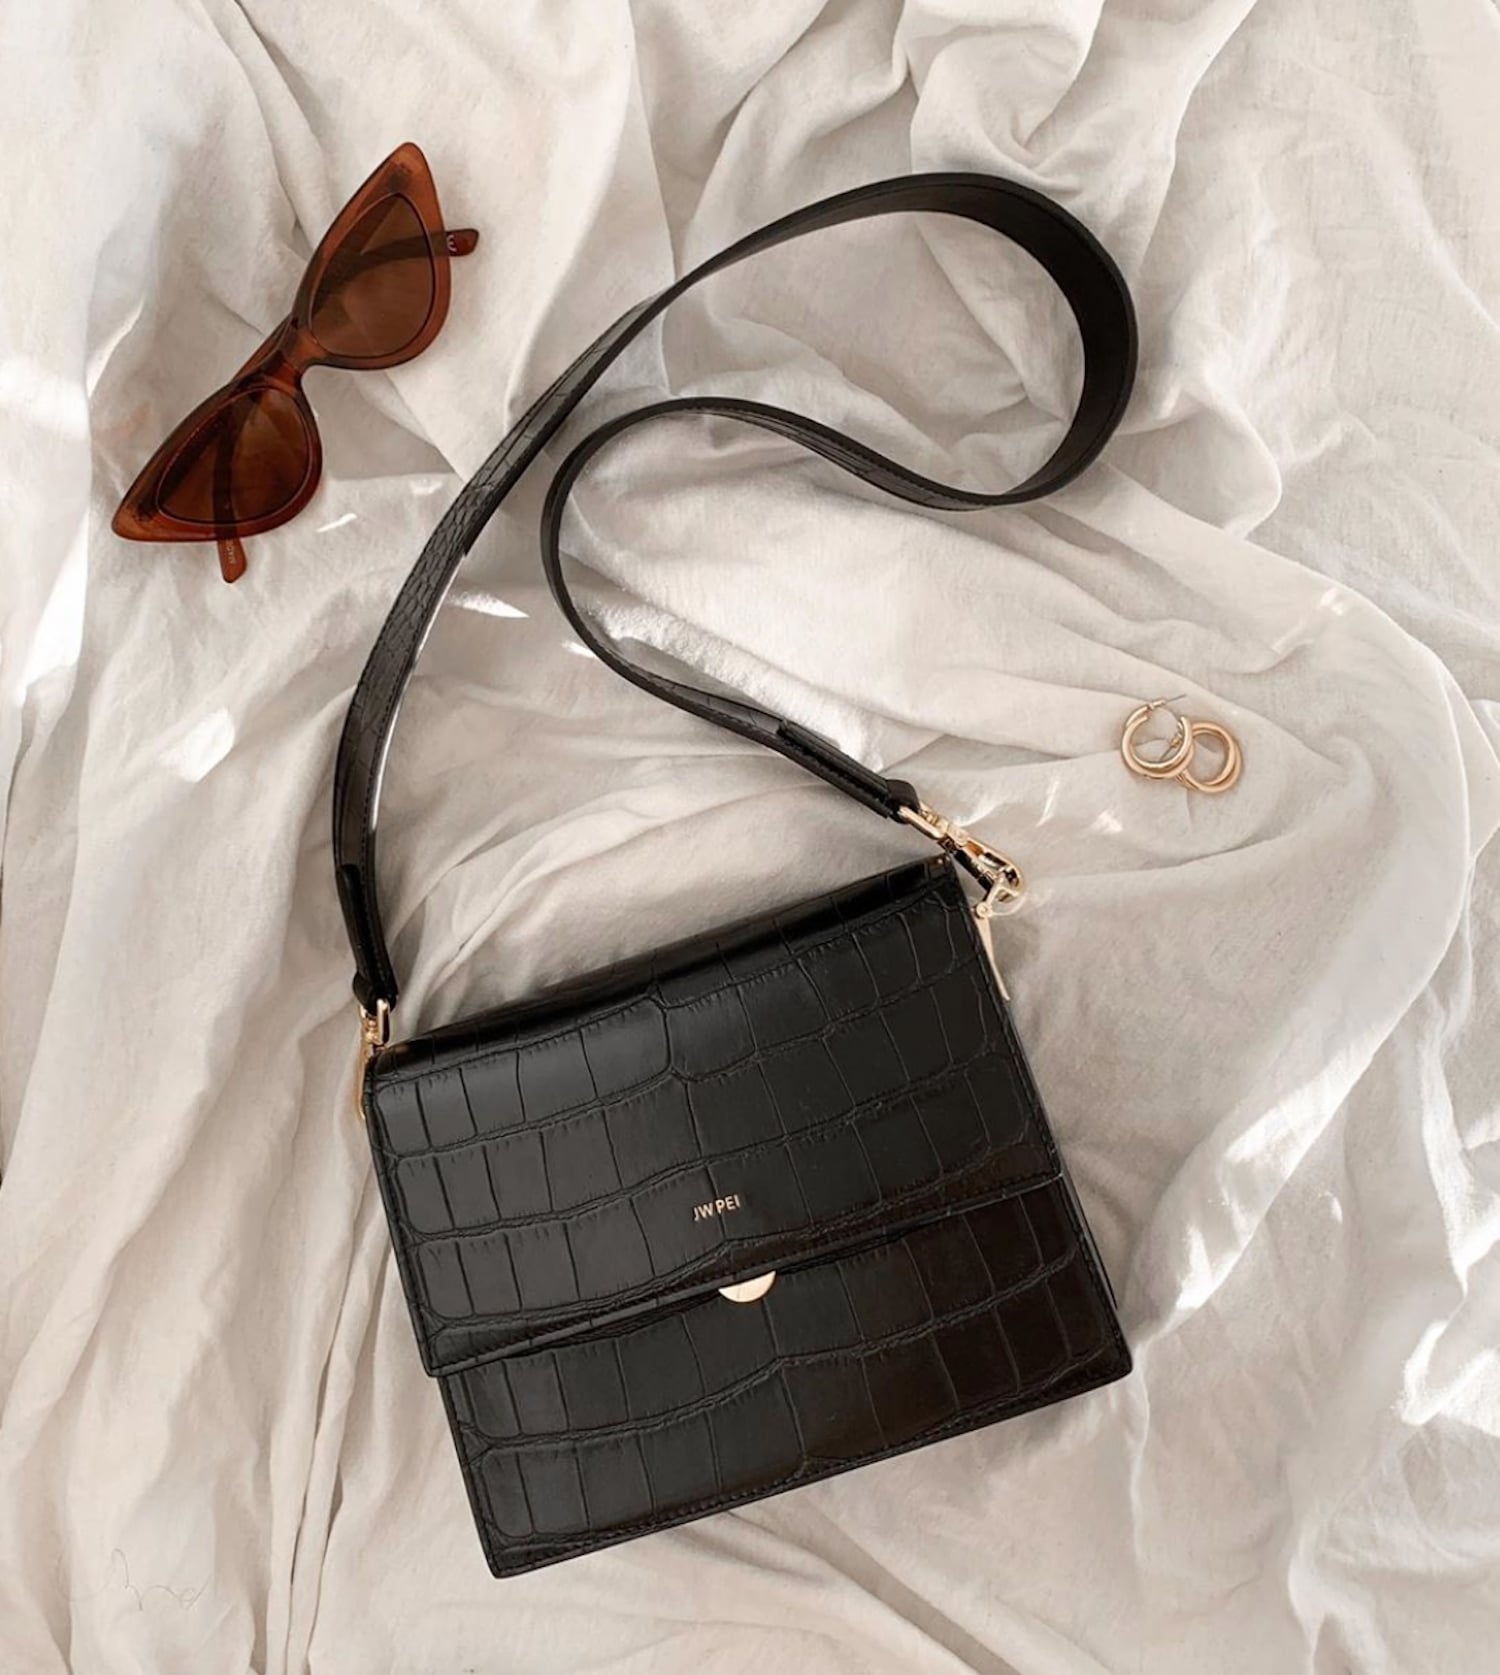 REVIEW* VEGAN Leather! Friday by JW Pei Envelope Chain Crossbody